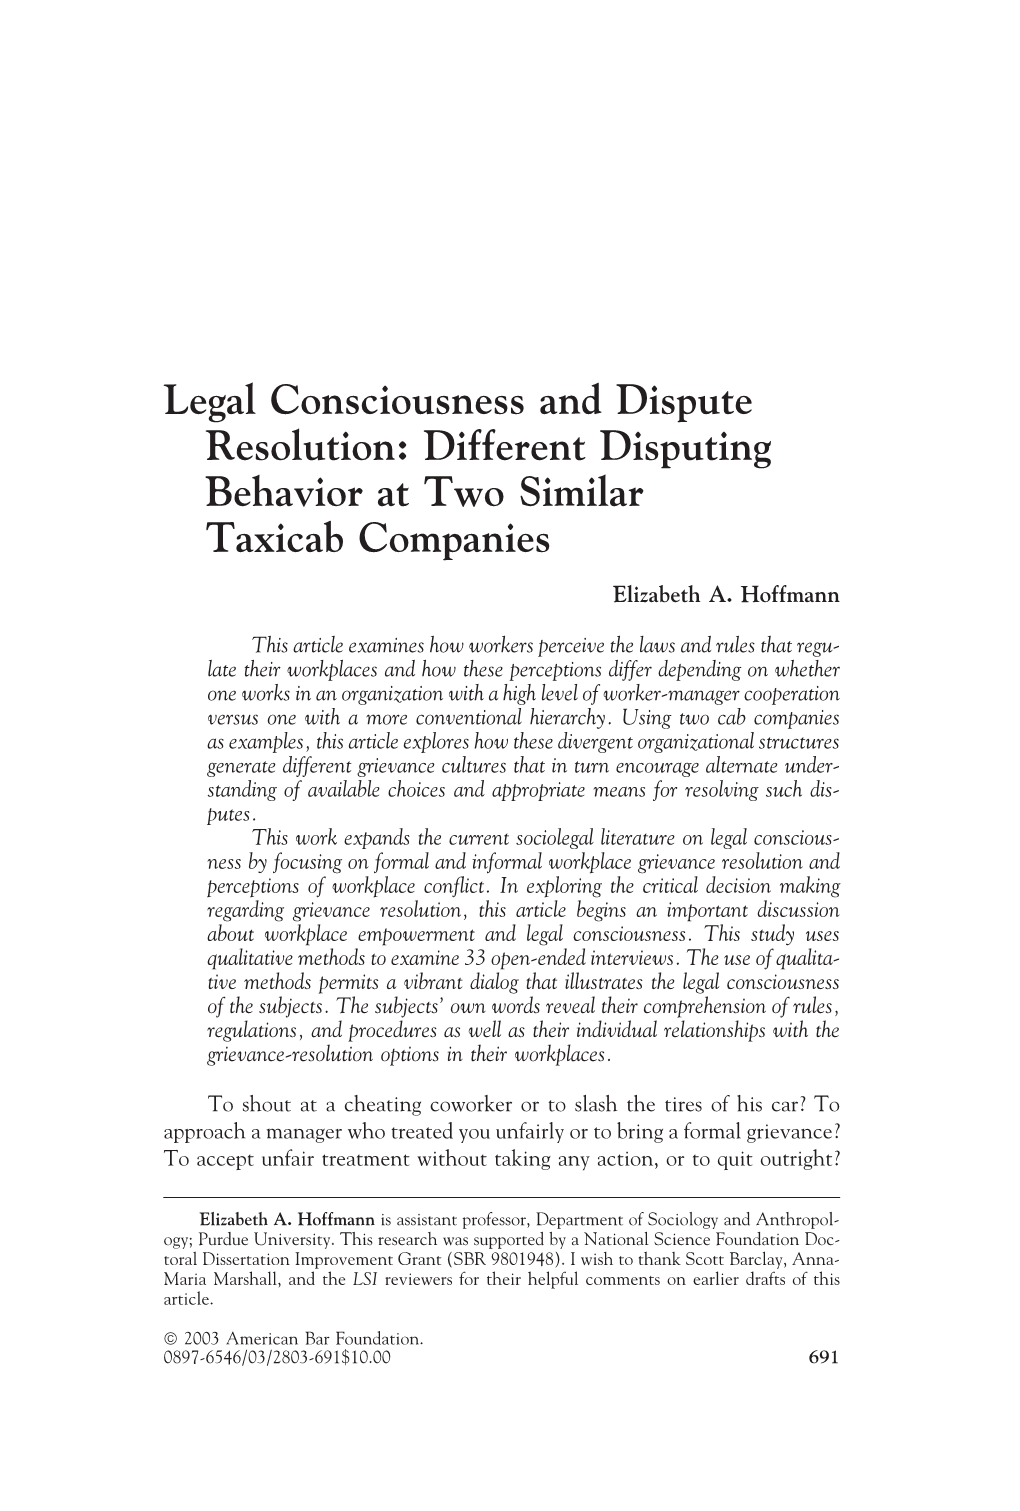 Legal Consciousness and Dispute Resolution: Different Disputing Behavior at Two Similar Taxicab Companies